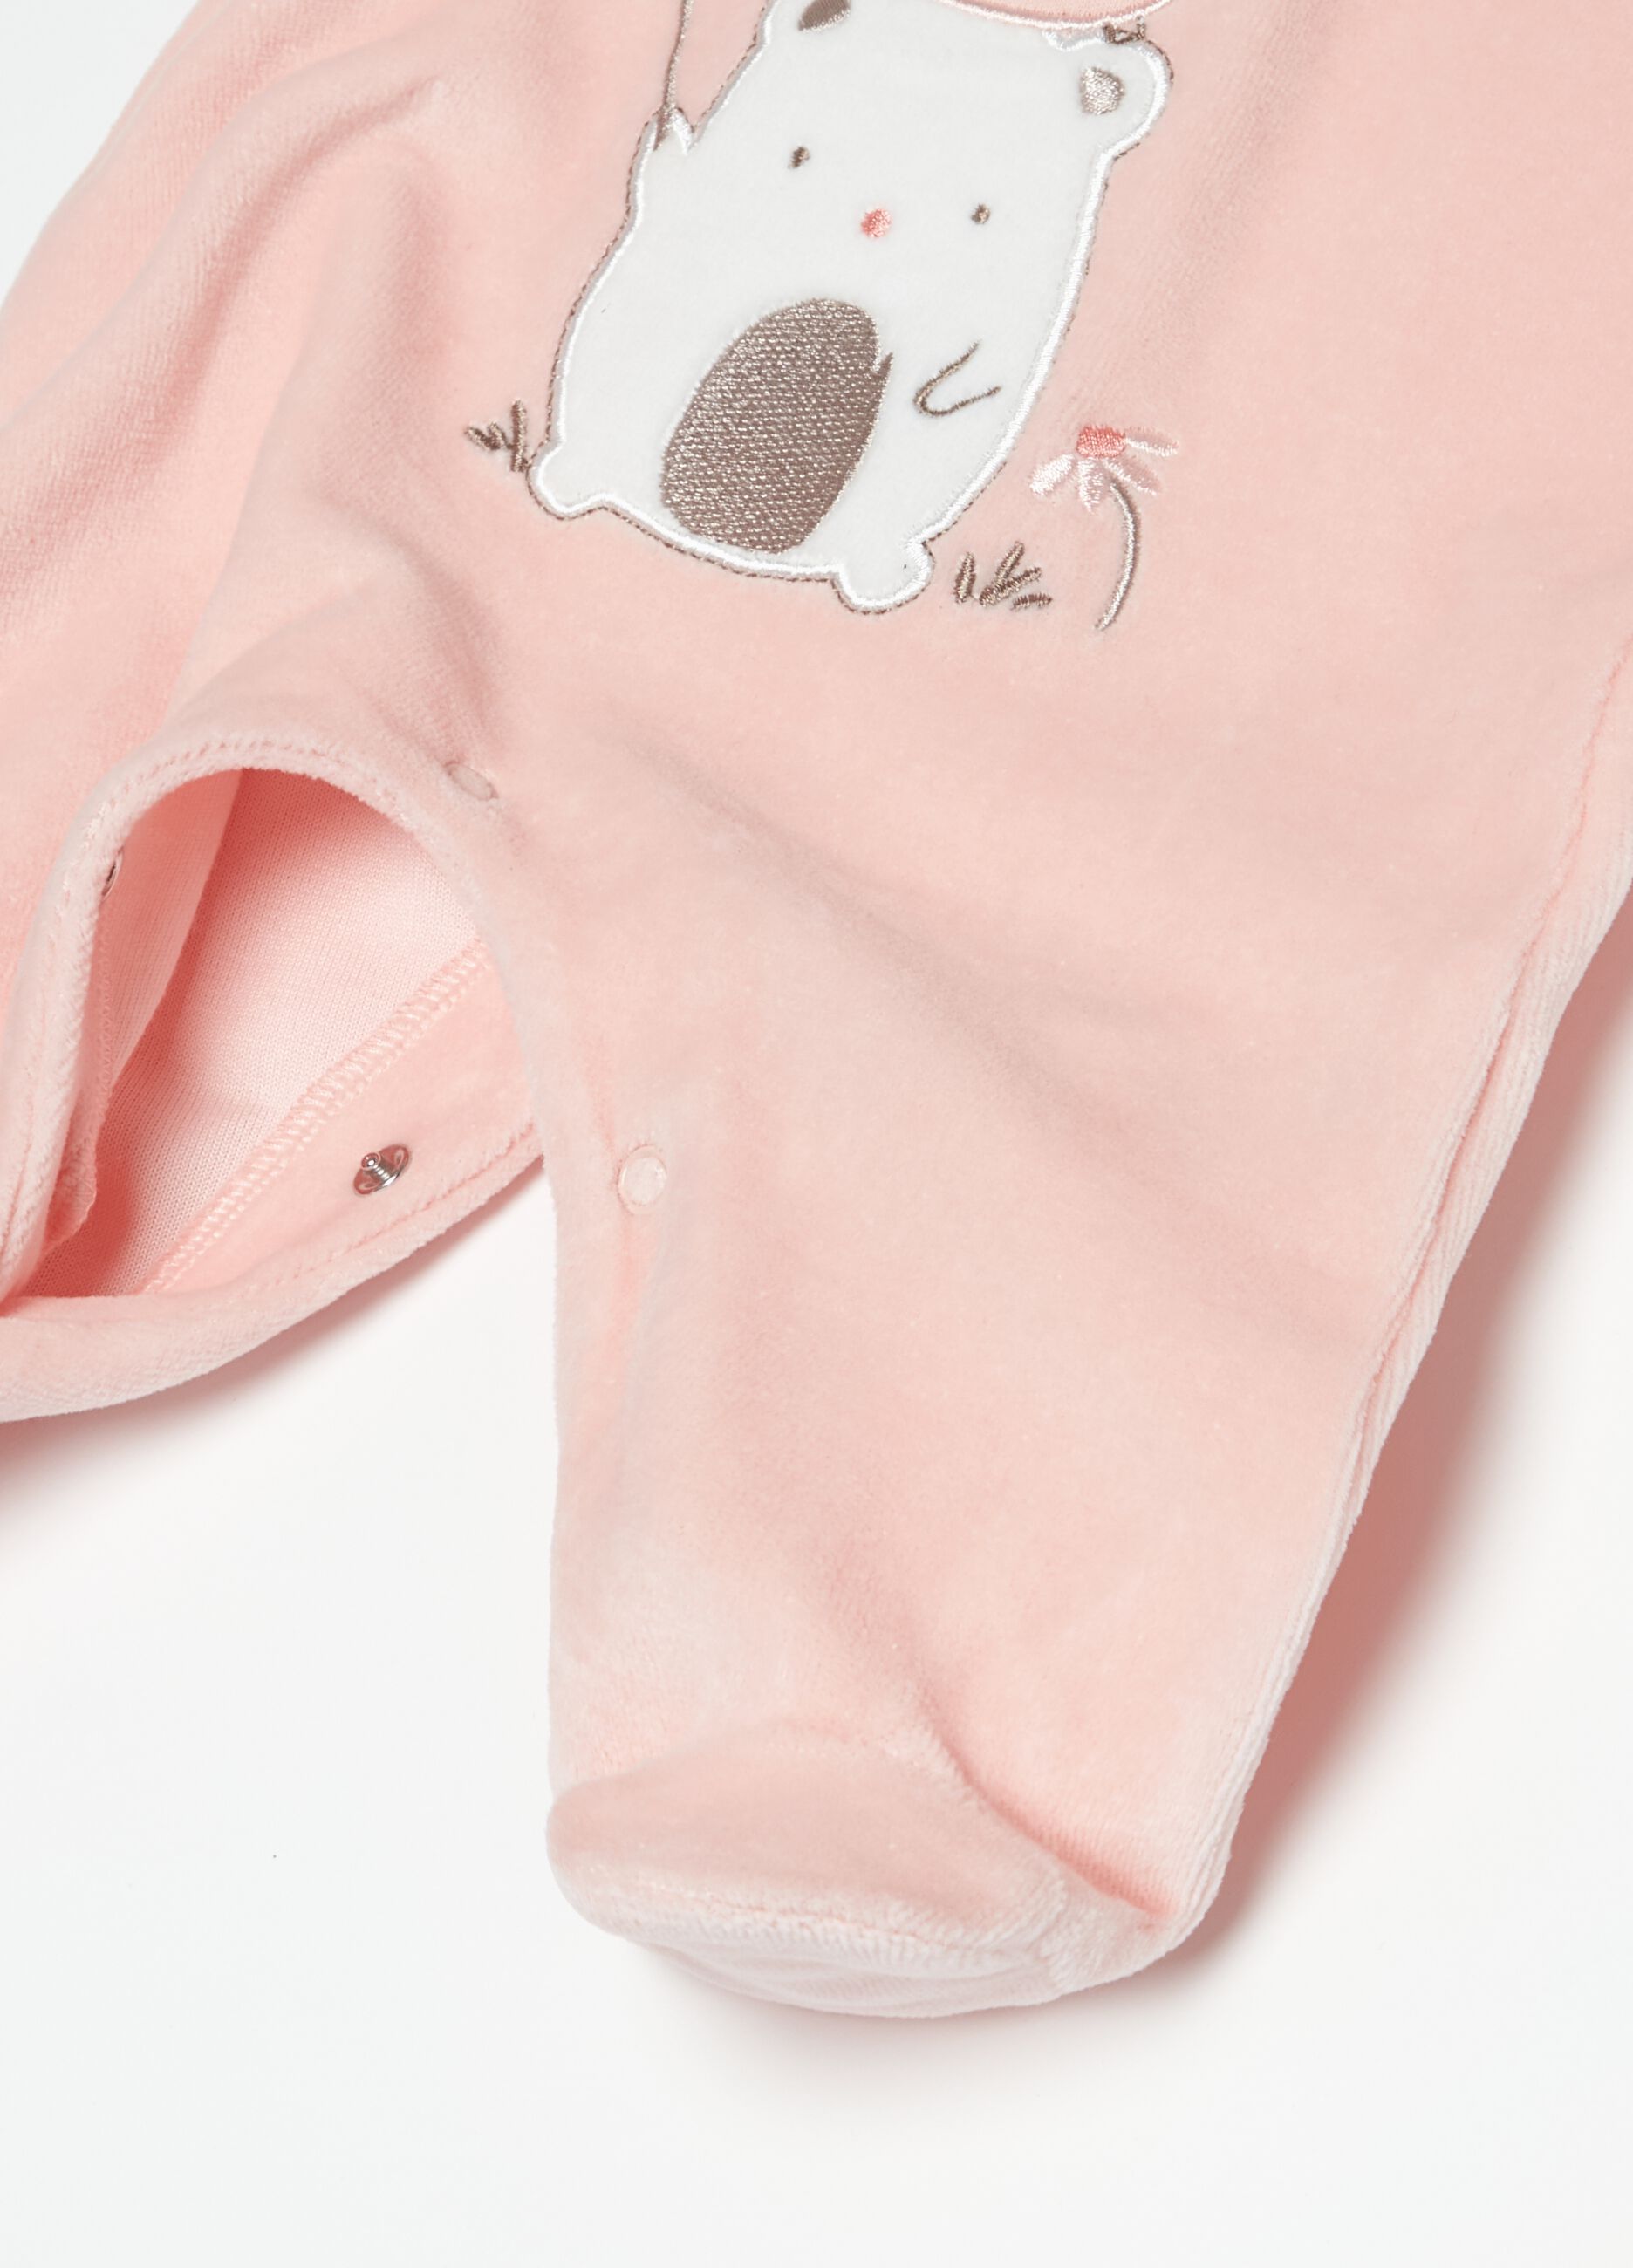 Velour onesie with animal print embroidery